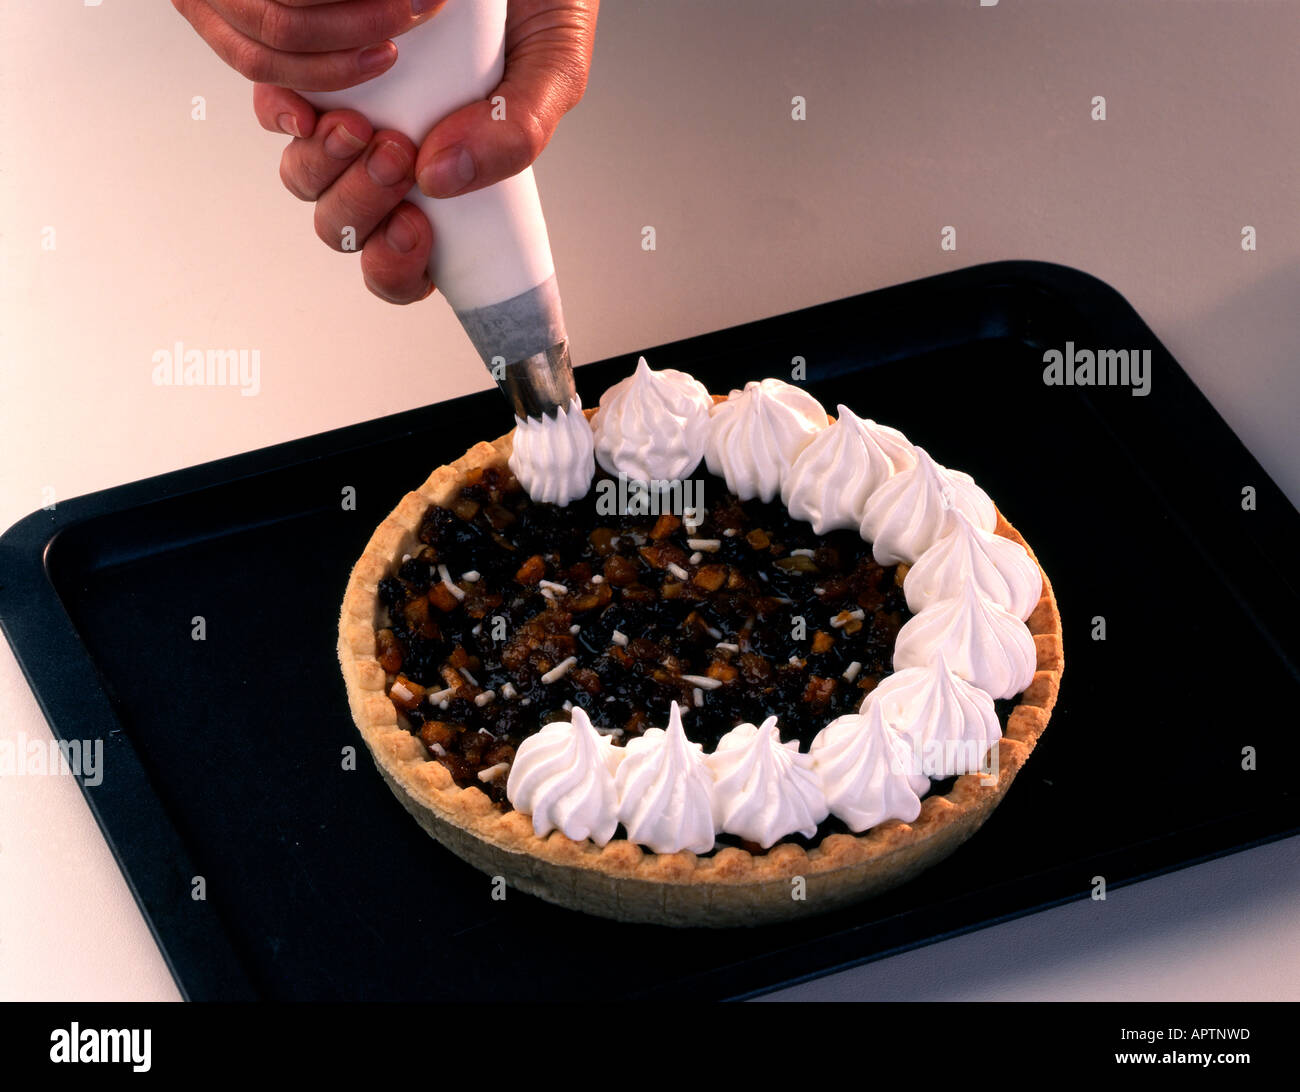 Steps to piping meringue topping on mincemeat pie, Stock Photo